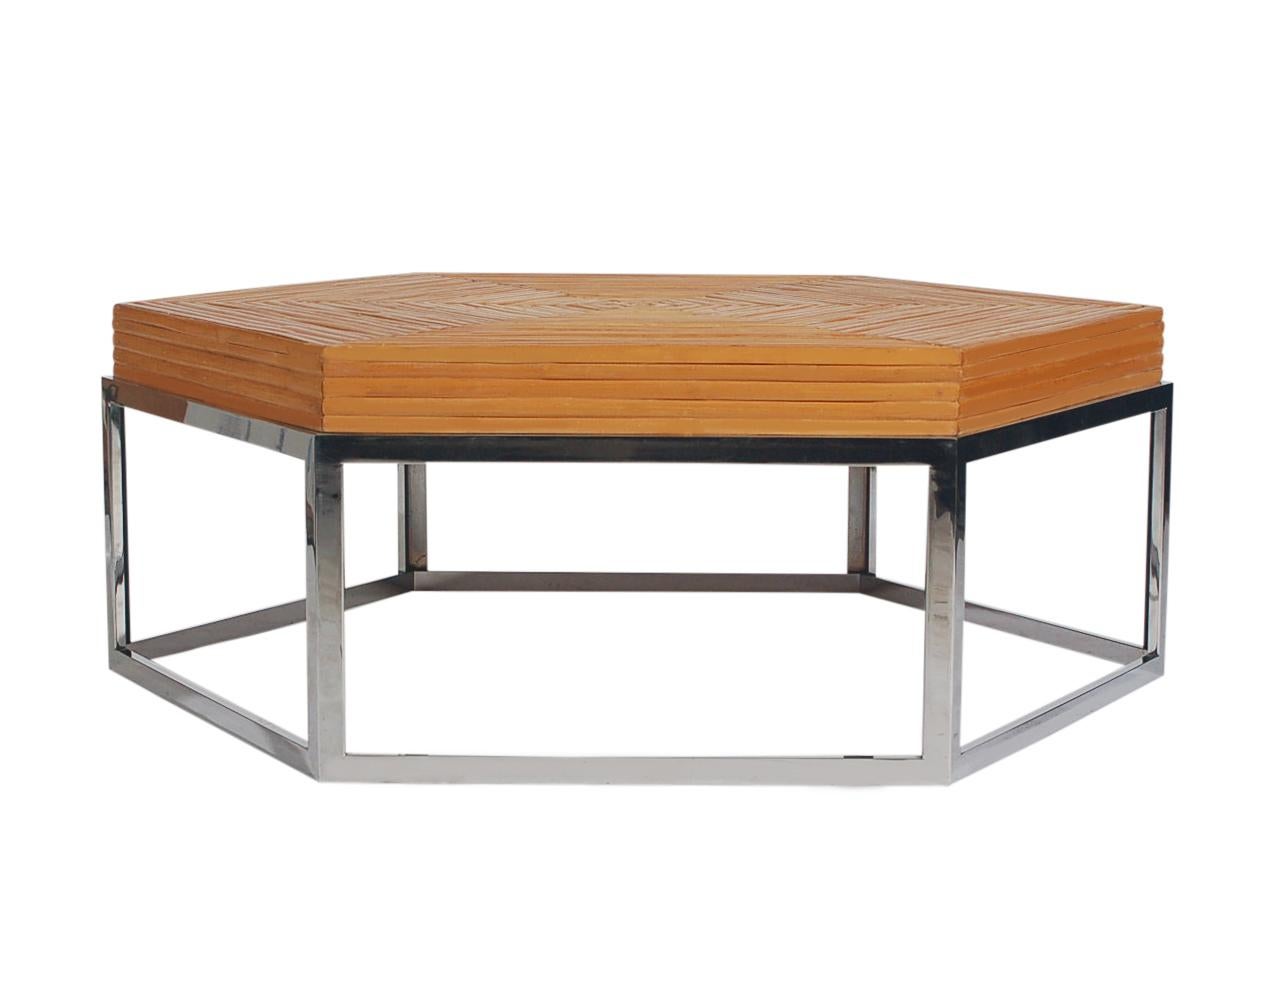 American Mid-Century Modern Rattan Bamboo and Chrome Hexagonal Cocktail Table For Sale